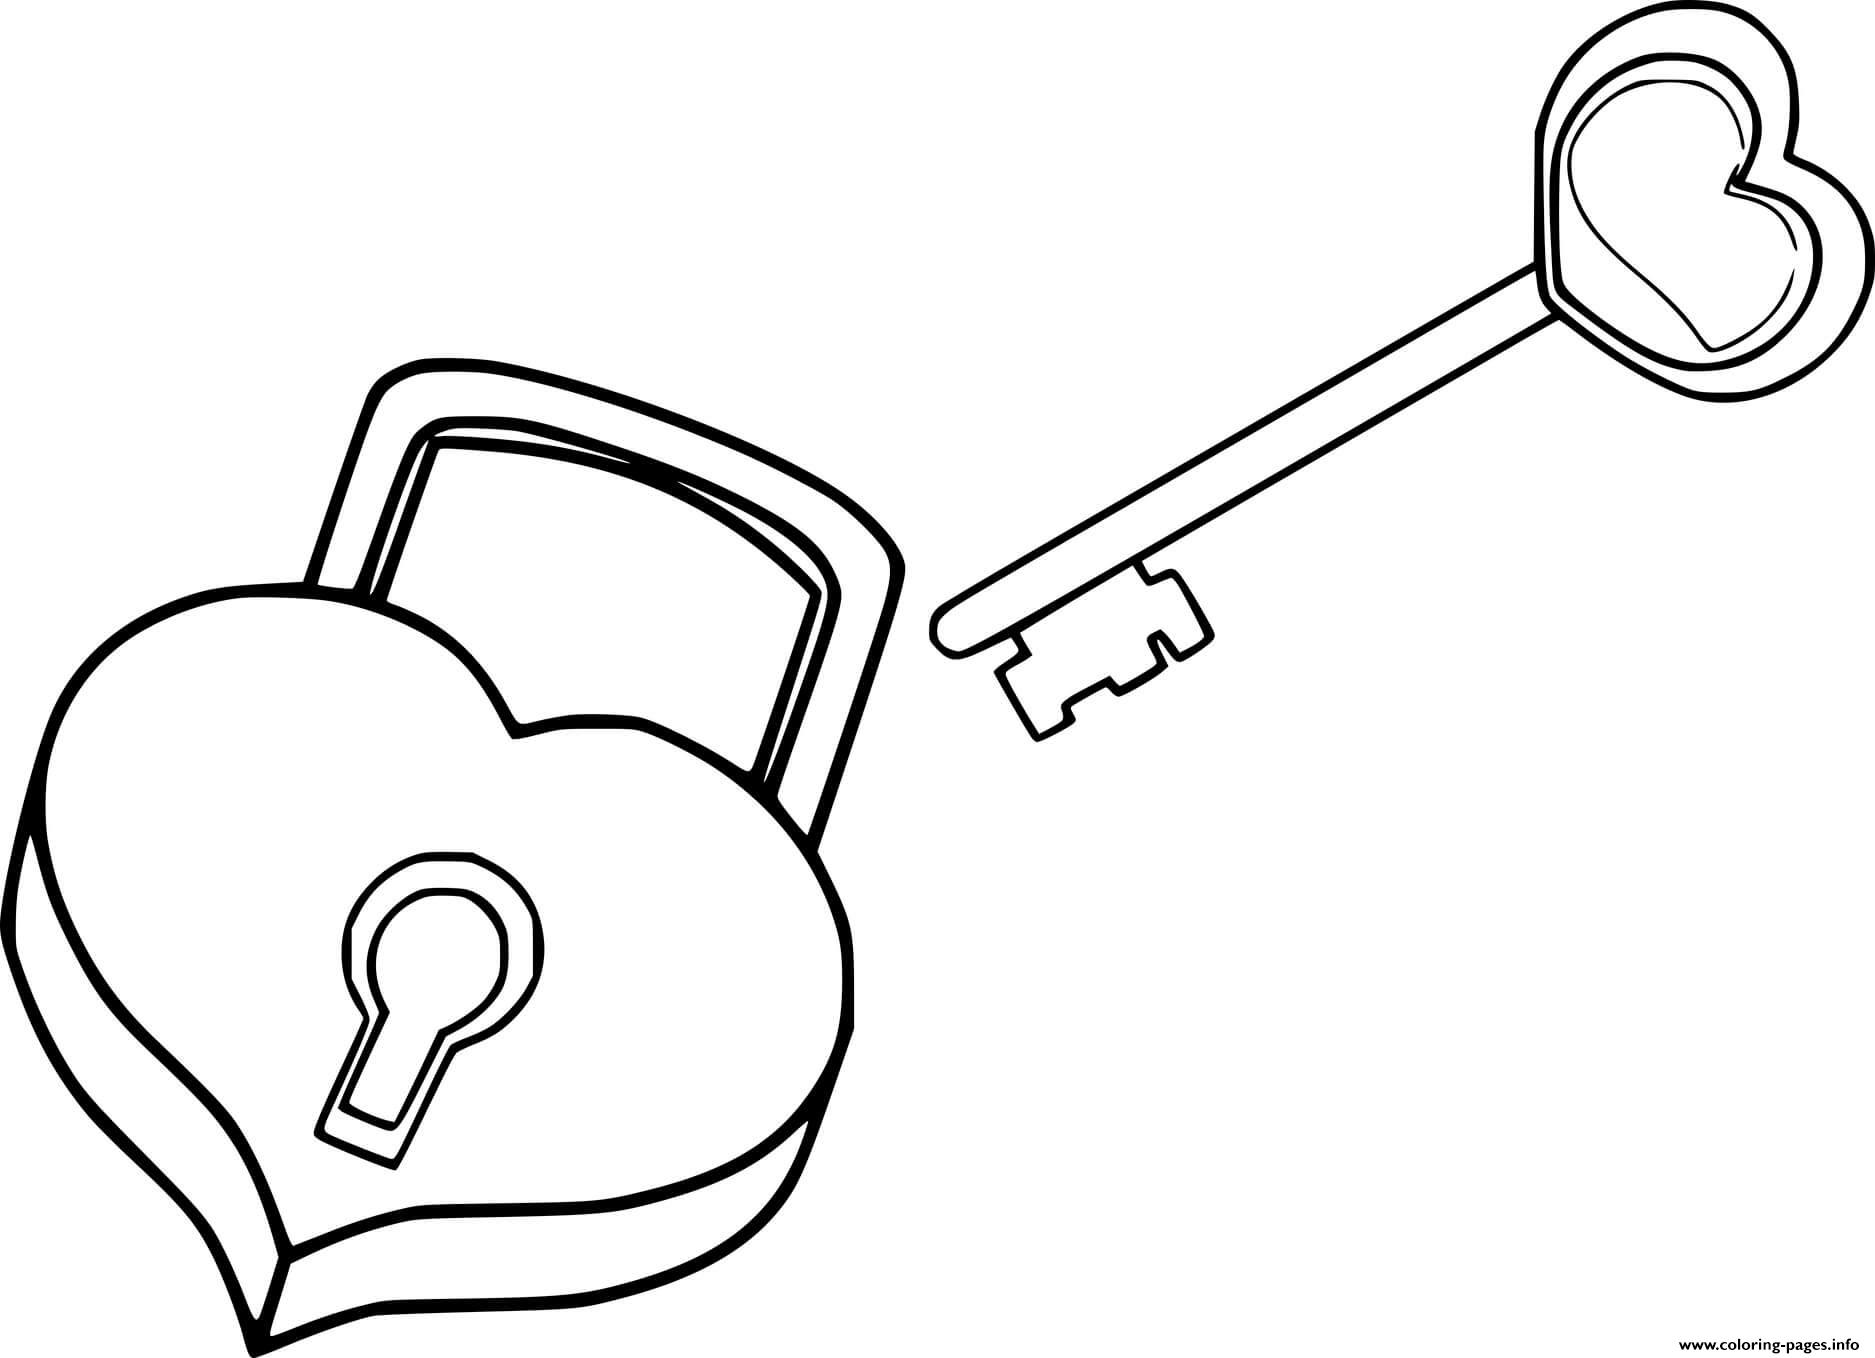 Heart Shaped Lock And Key coloring